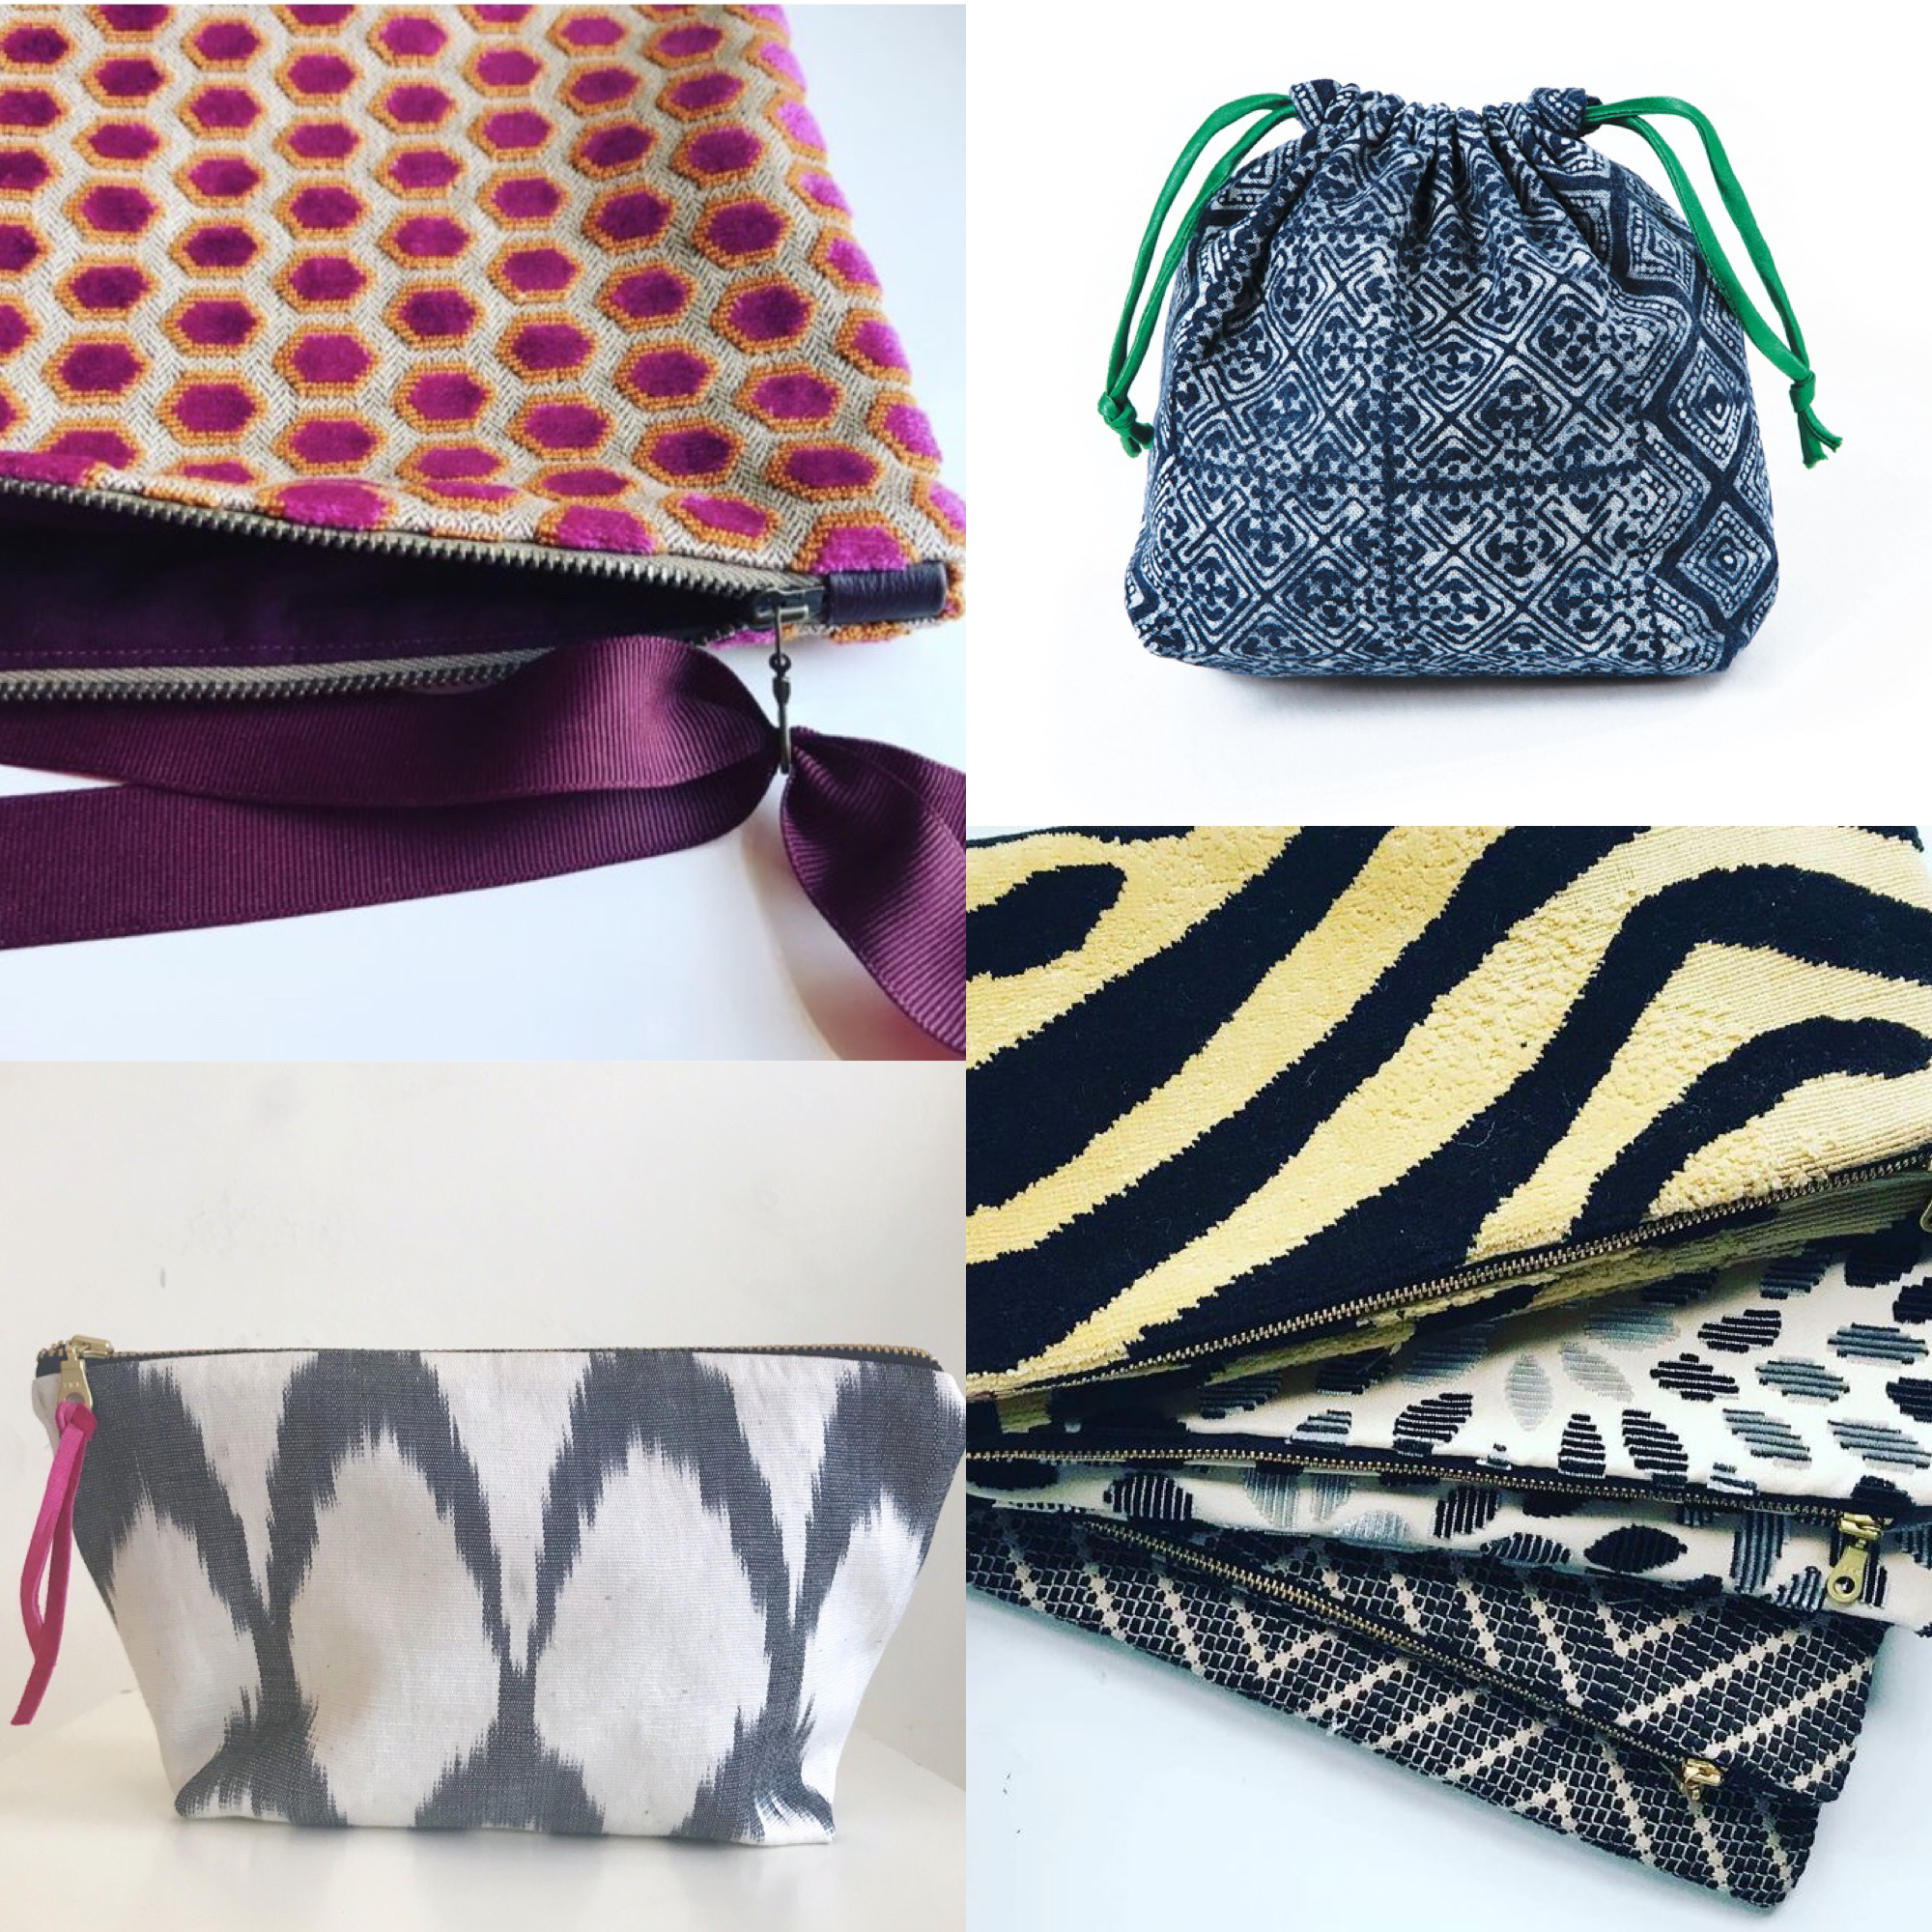 5 Best Fabrics for Sewing Bags and Purses, Sew Bags: The Practical